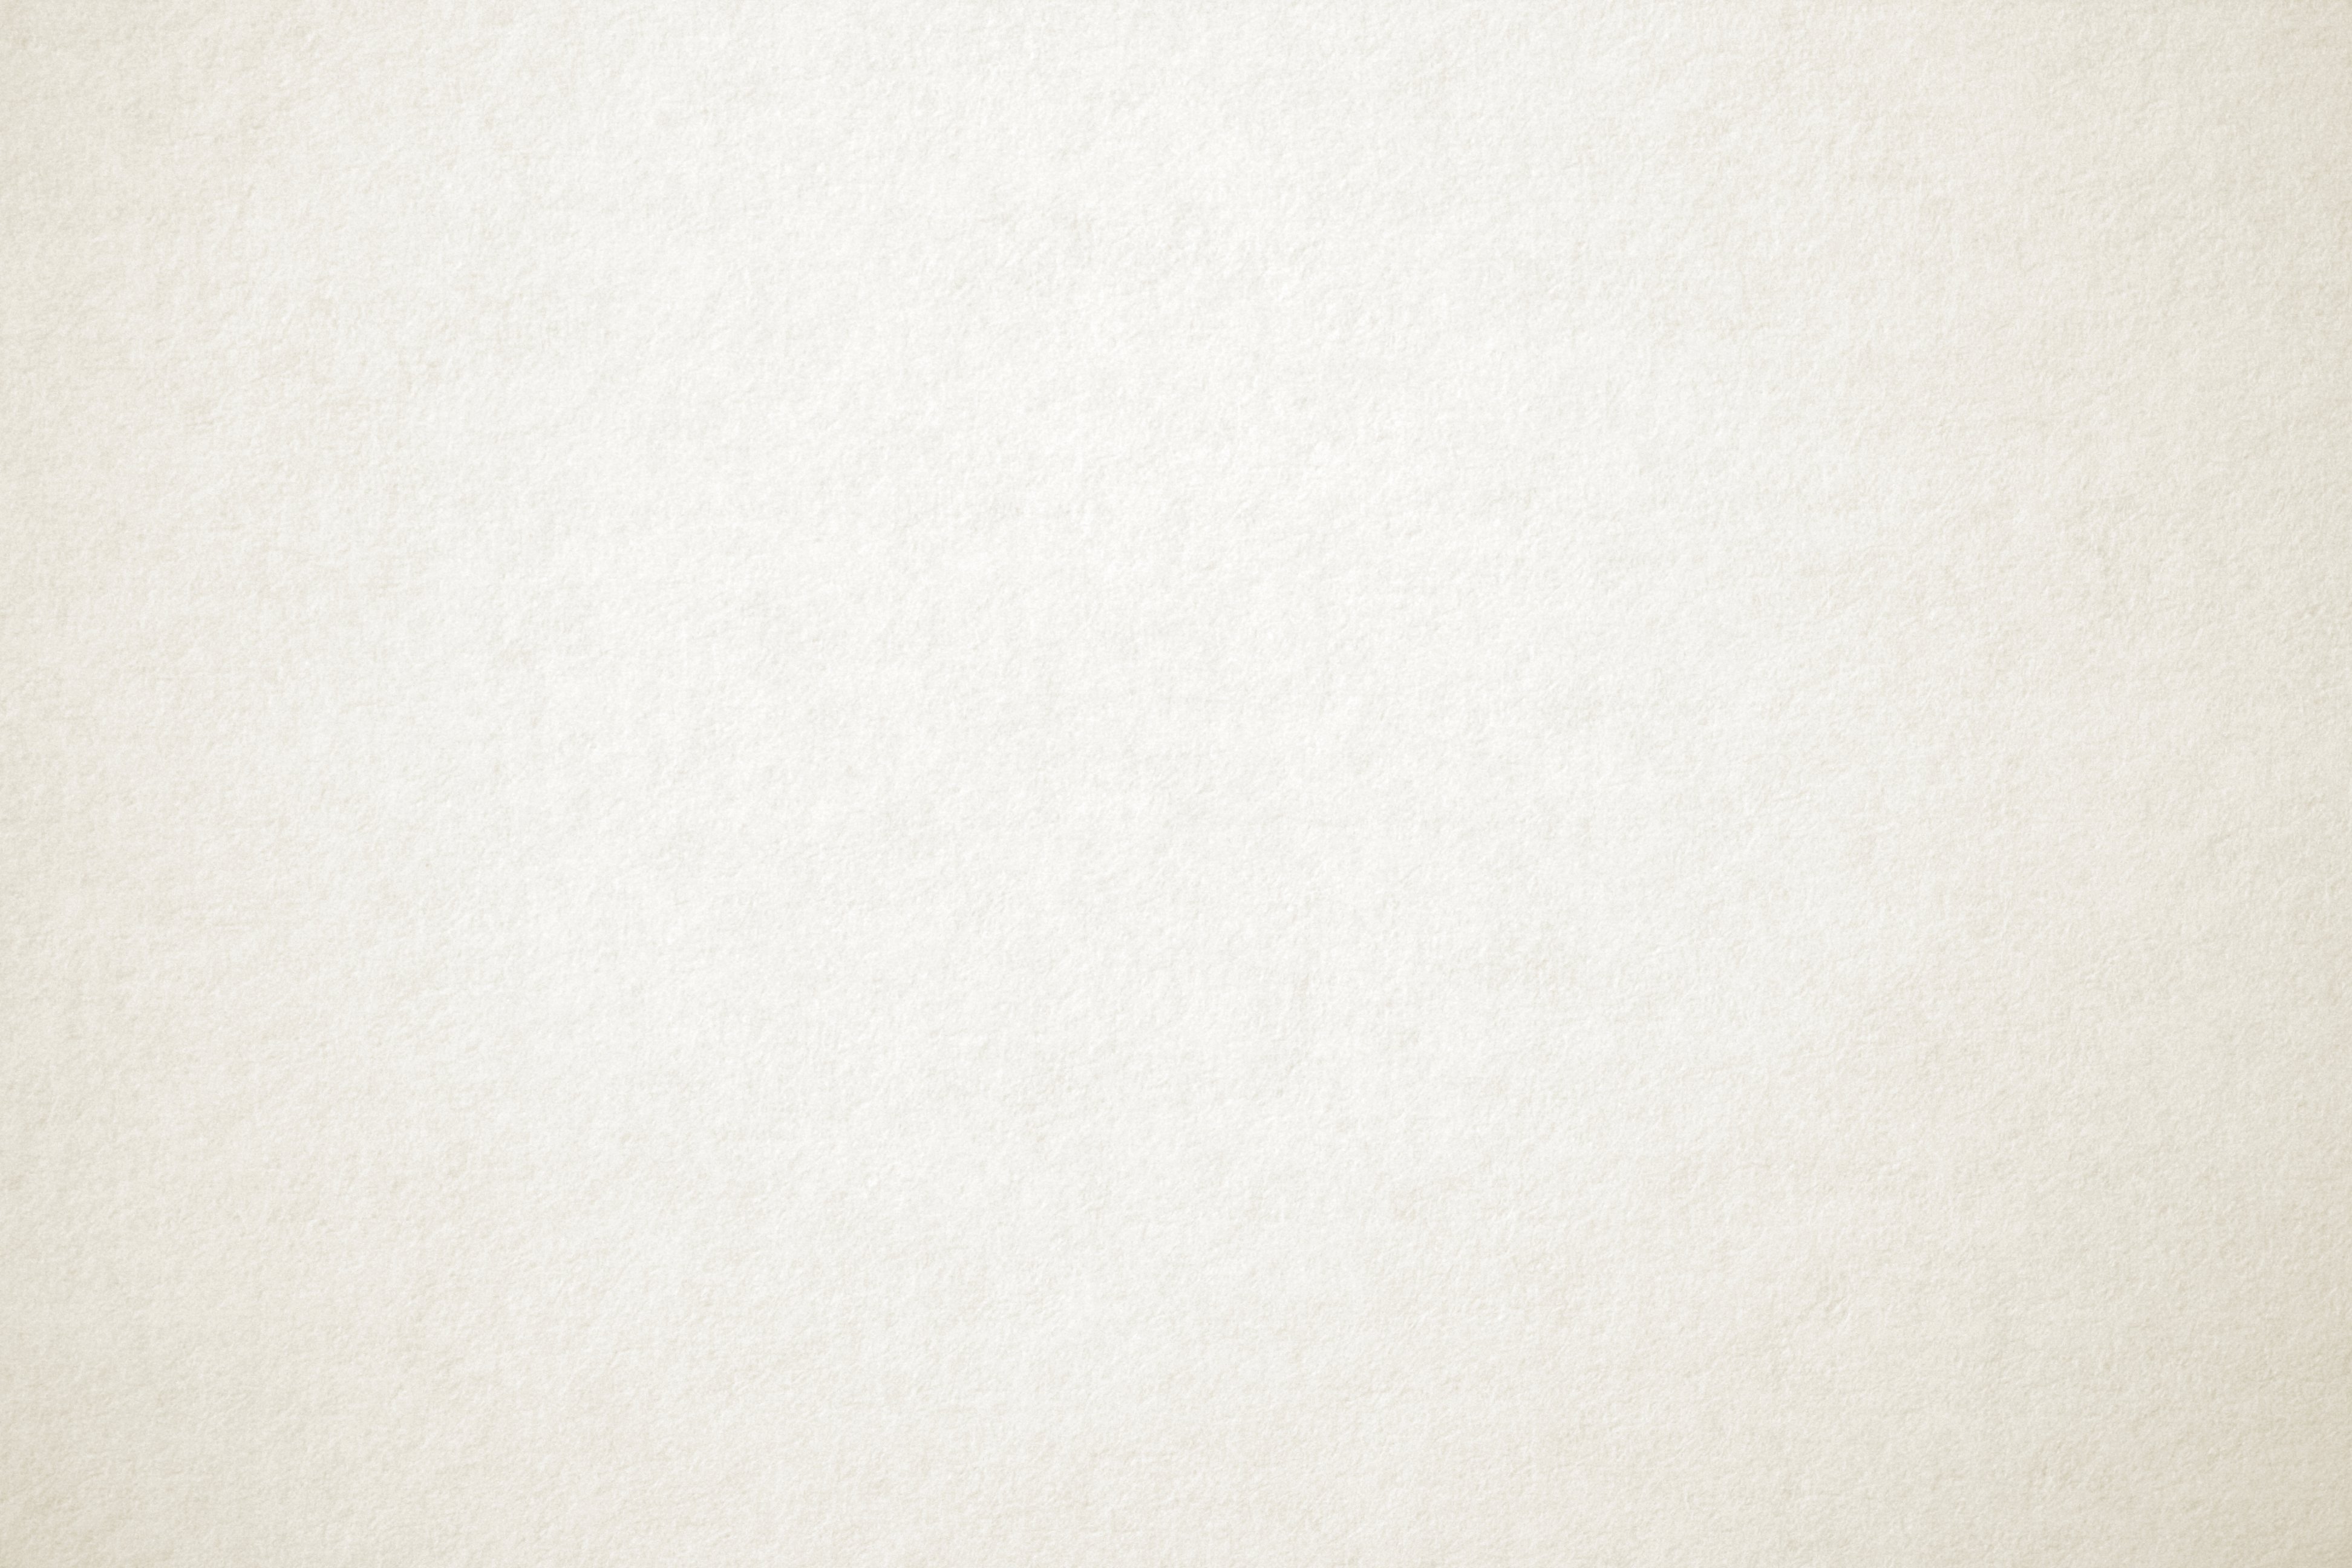 Ivory Off White Paper Texture Picture Photograph Photos 3888x2592